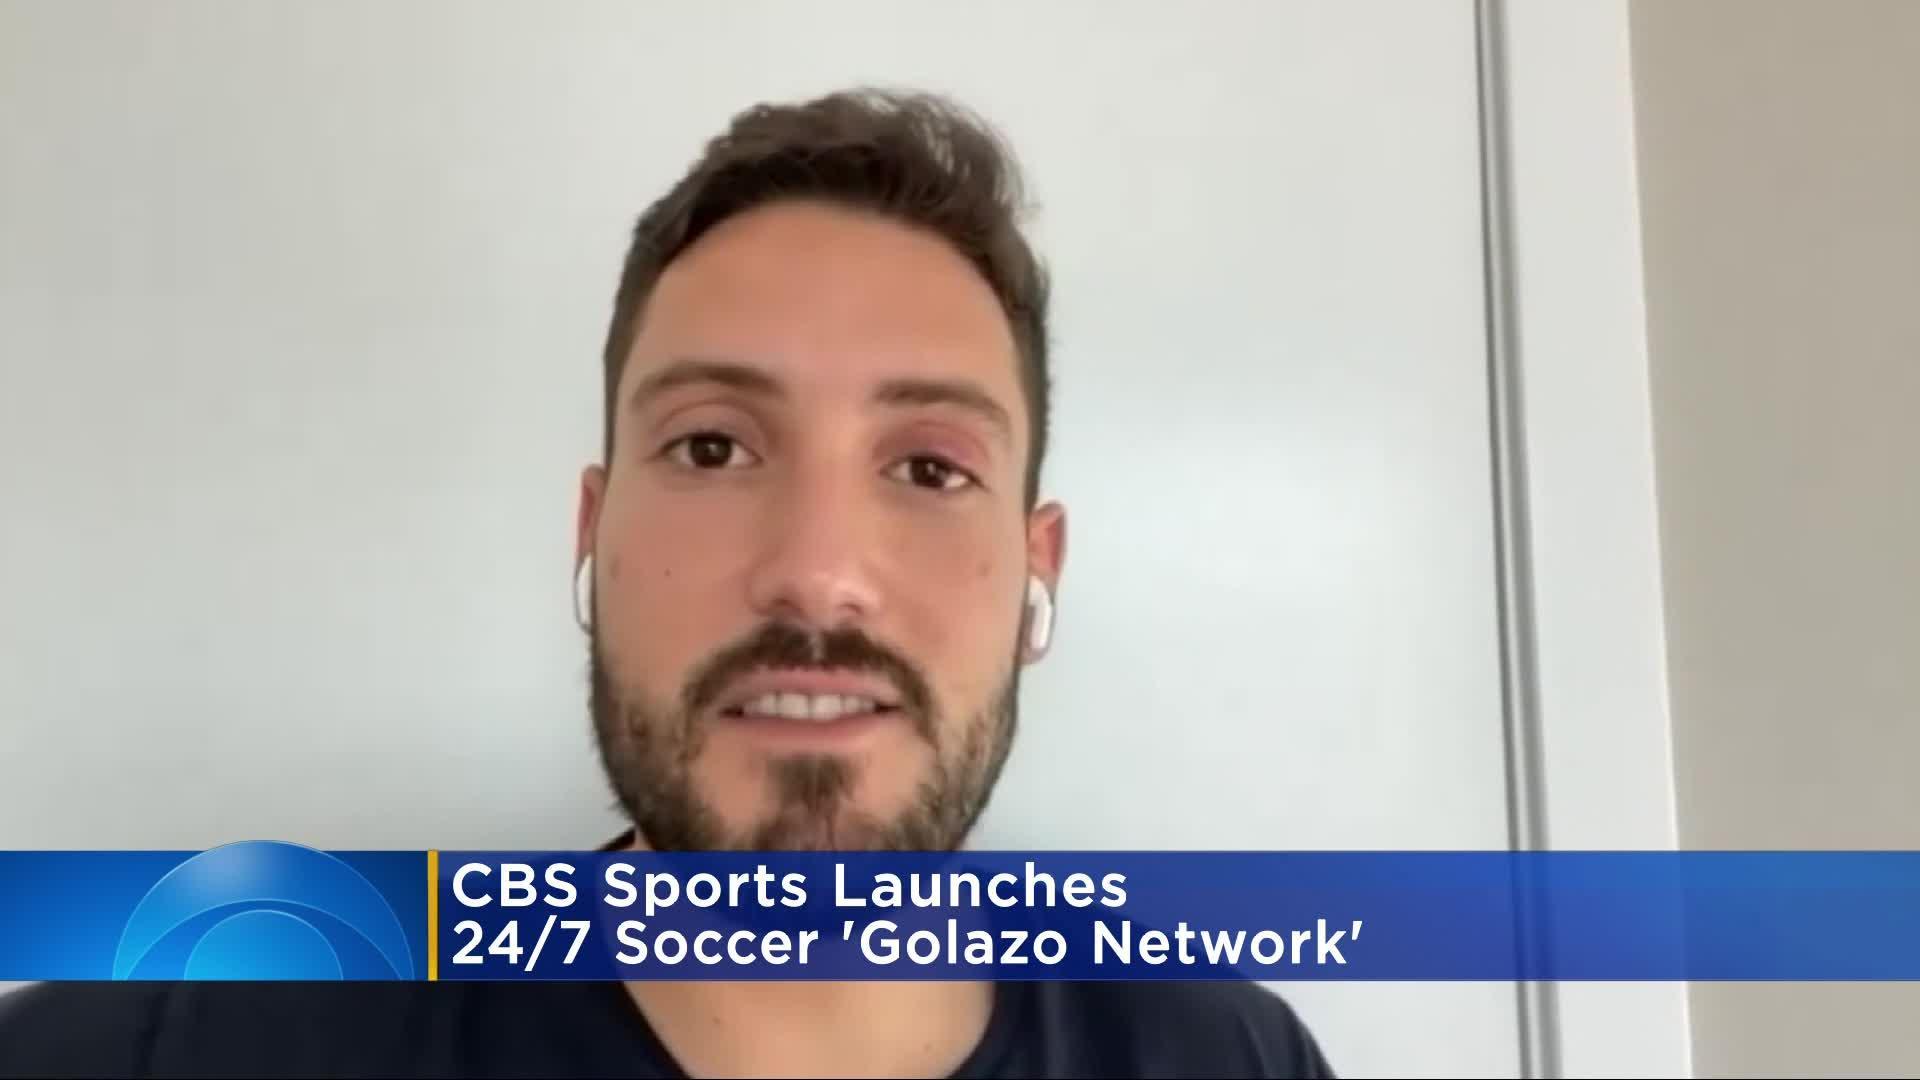 CBS Sports launches Golazo Network dedicated to soccer